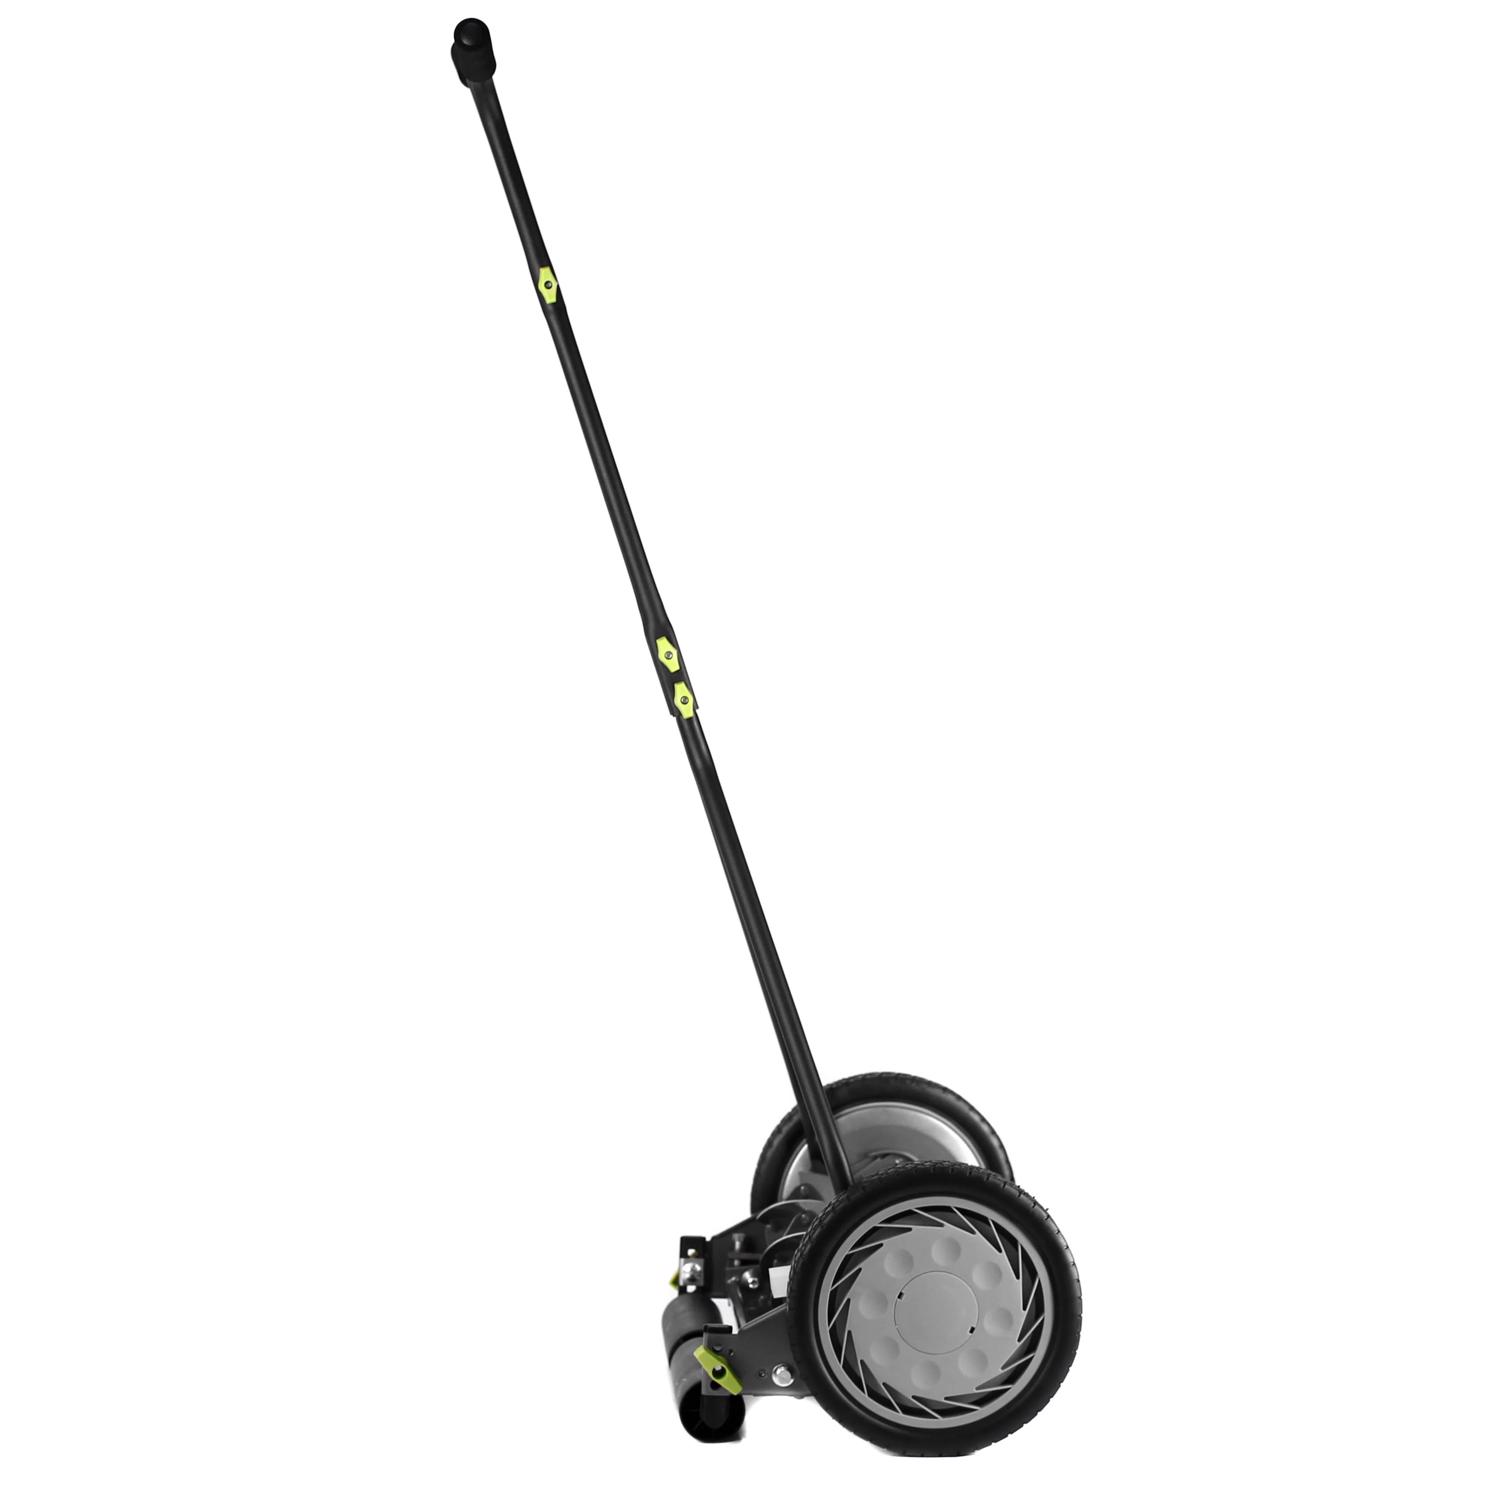 Earthwise 16 in. Manual Lawn Mower - Ace Hardware